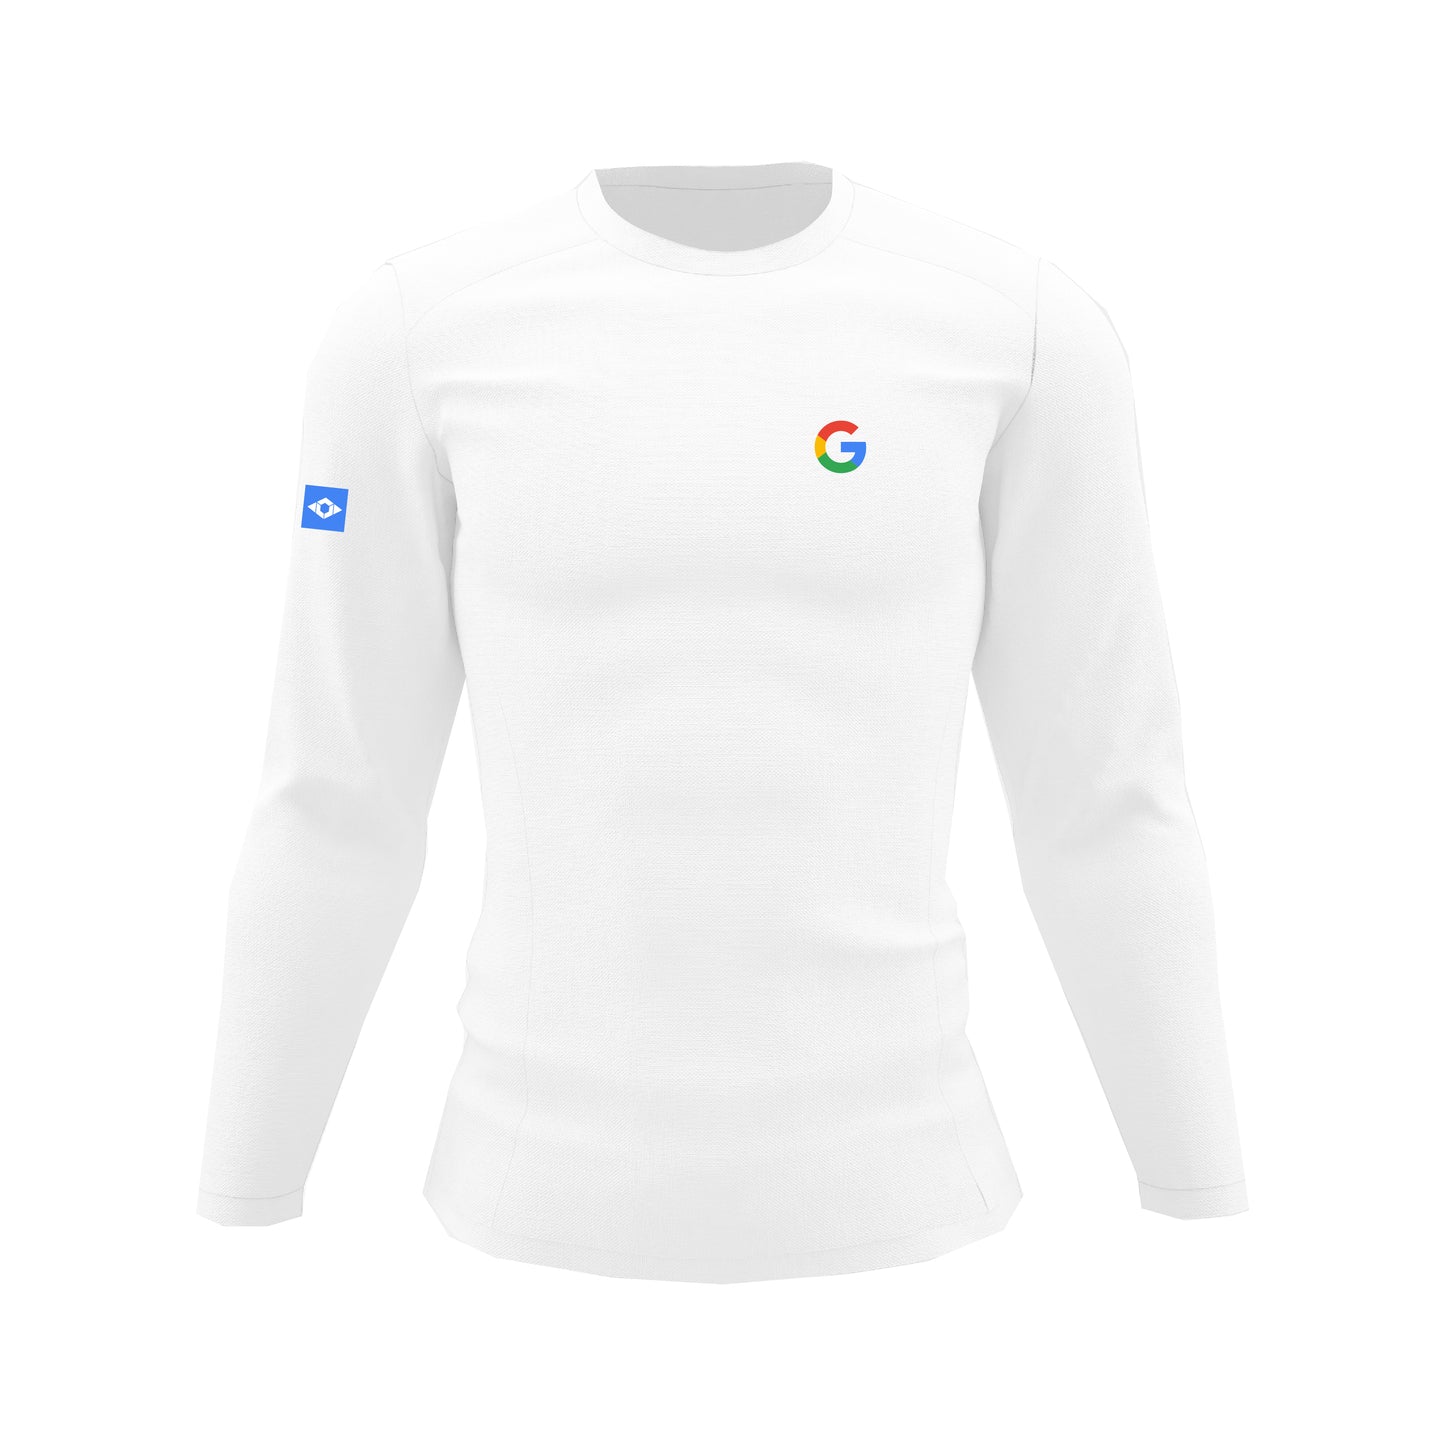 Google - Union of Forces ® Sweatshirt by Athletic Forces -  Model 3